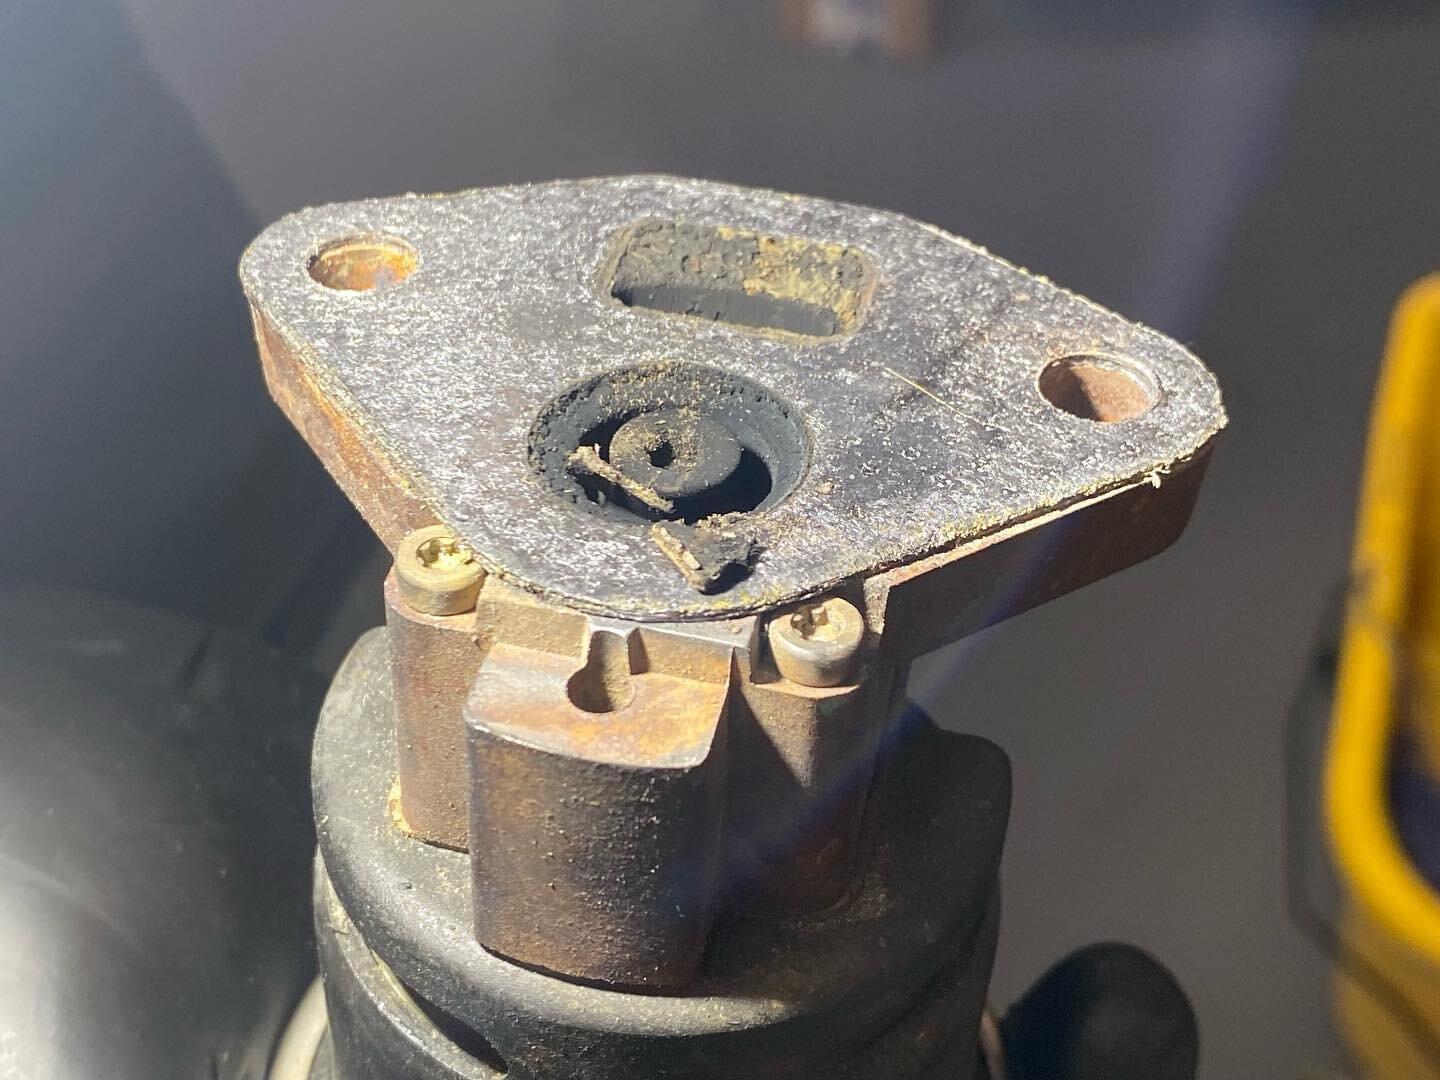 Symptoms lead me to believe the EGR valve is stuck open but I&rsquo;m not sure how that could have happened. The EGR valve: I wanted to eat a cookie. 

#arhindrichsllc #houston #texas #cypresstexas #thatmiatashop #diagnostics #racecar #egrproblems #h